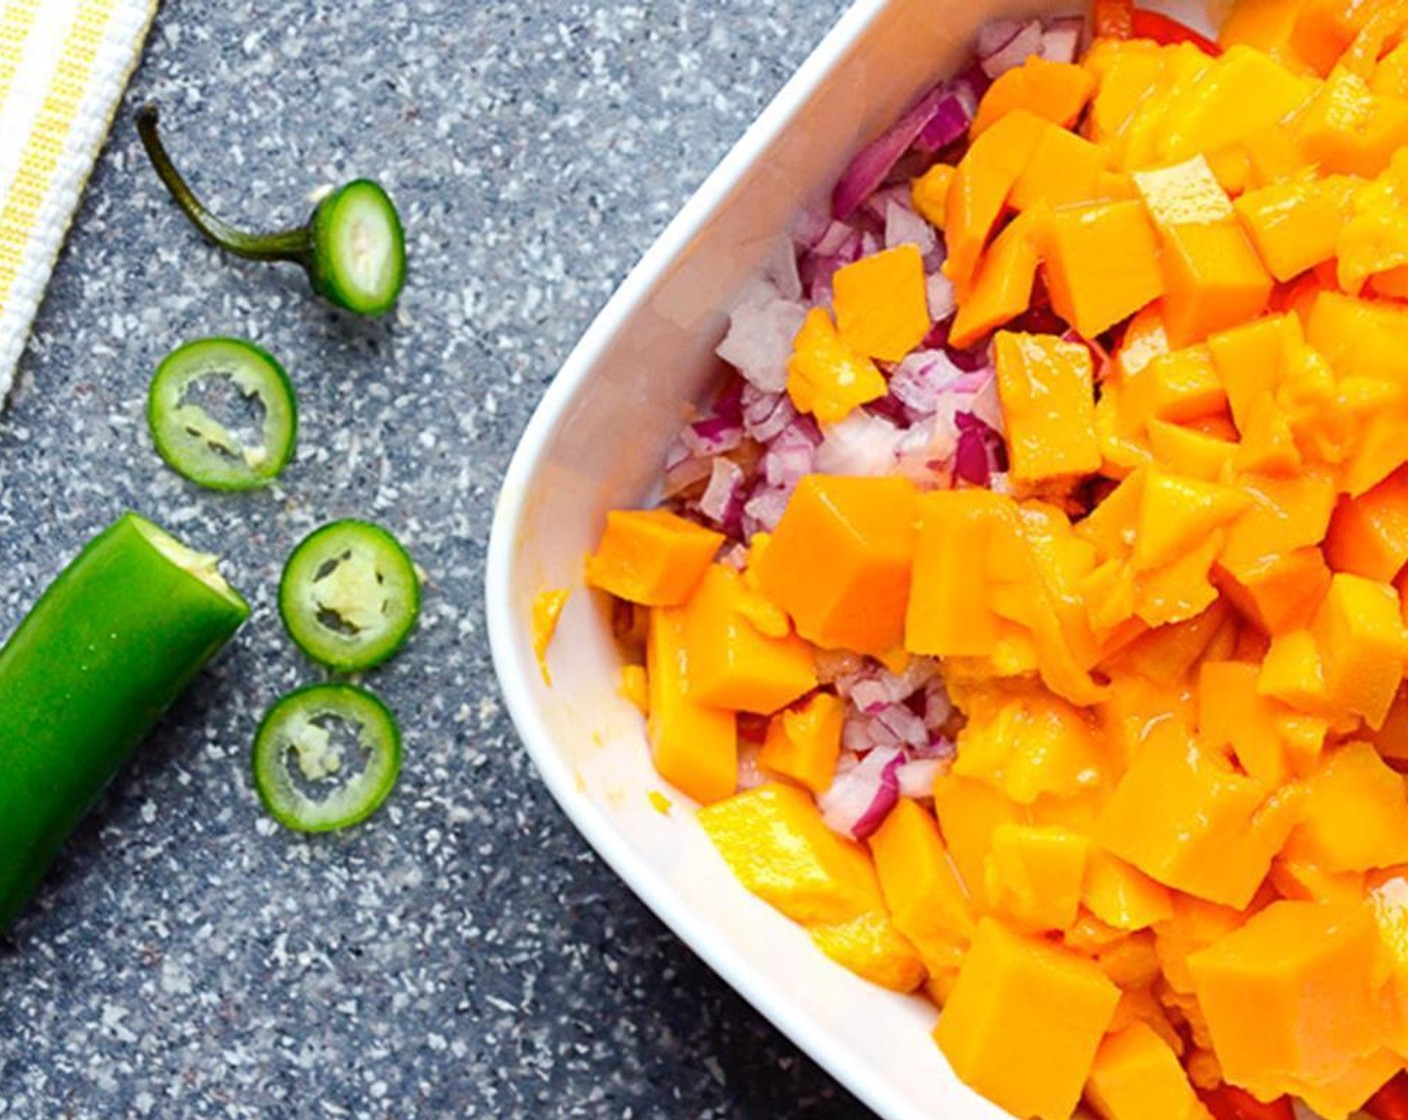 step 5 In a small bowl, combine the Mangoes (2), the minced bell pepper, Red Onion (1/4), Serrano Chili (1), zest and juice of the Lime (1) and Salt (1 pinch). Stir to combine and set aside.